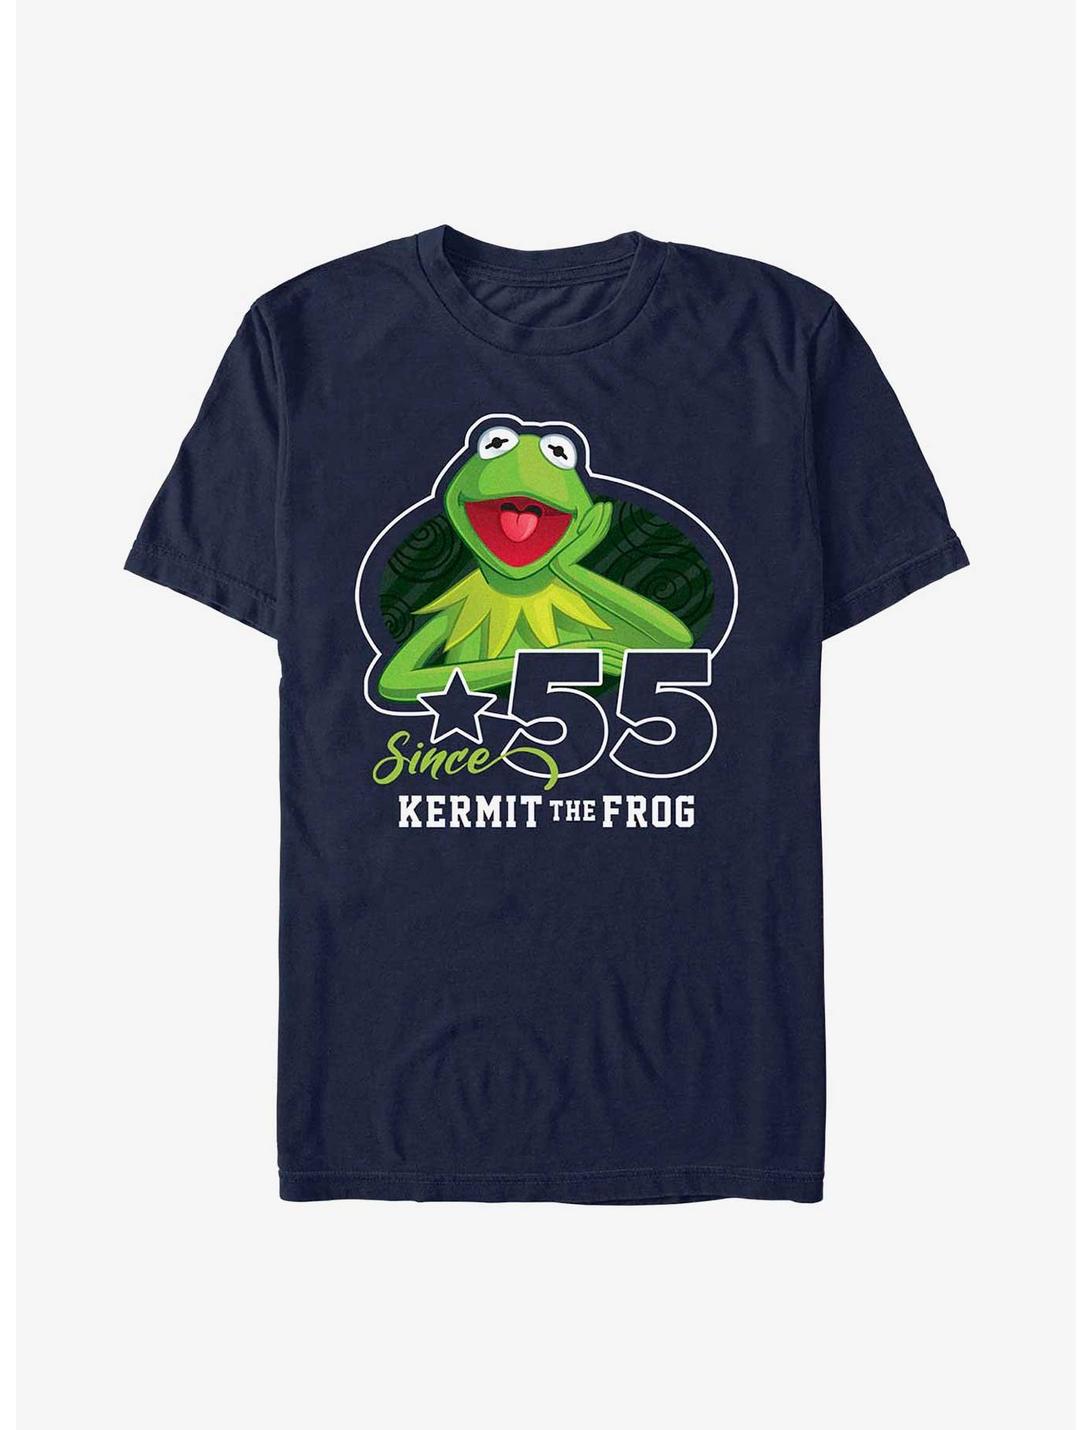 Disney The Muppets Kermit The Frog Since '55 T-Shirt, NAVY, hi-res